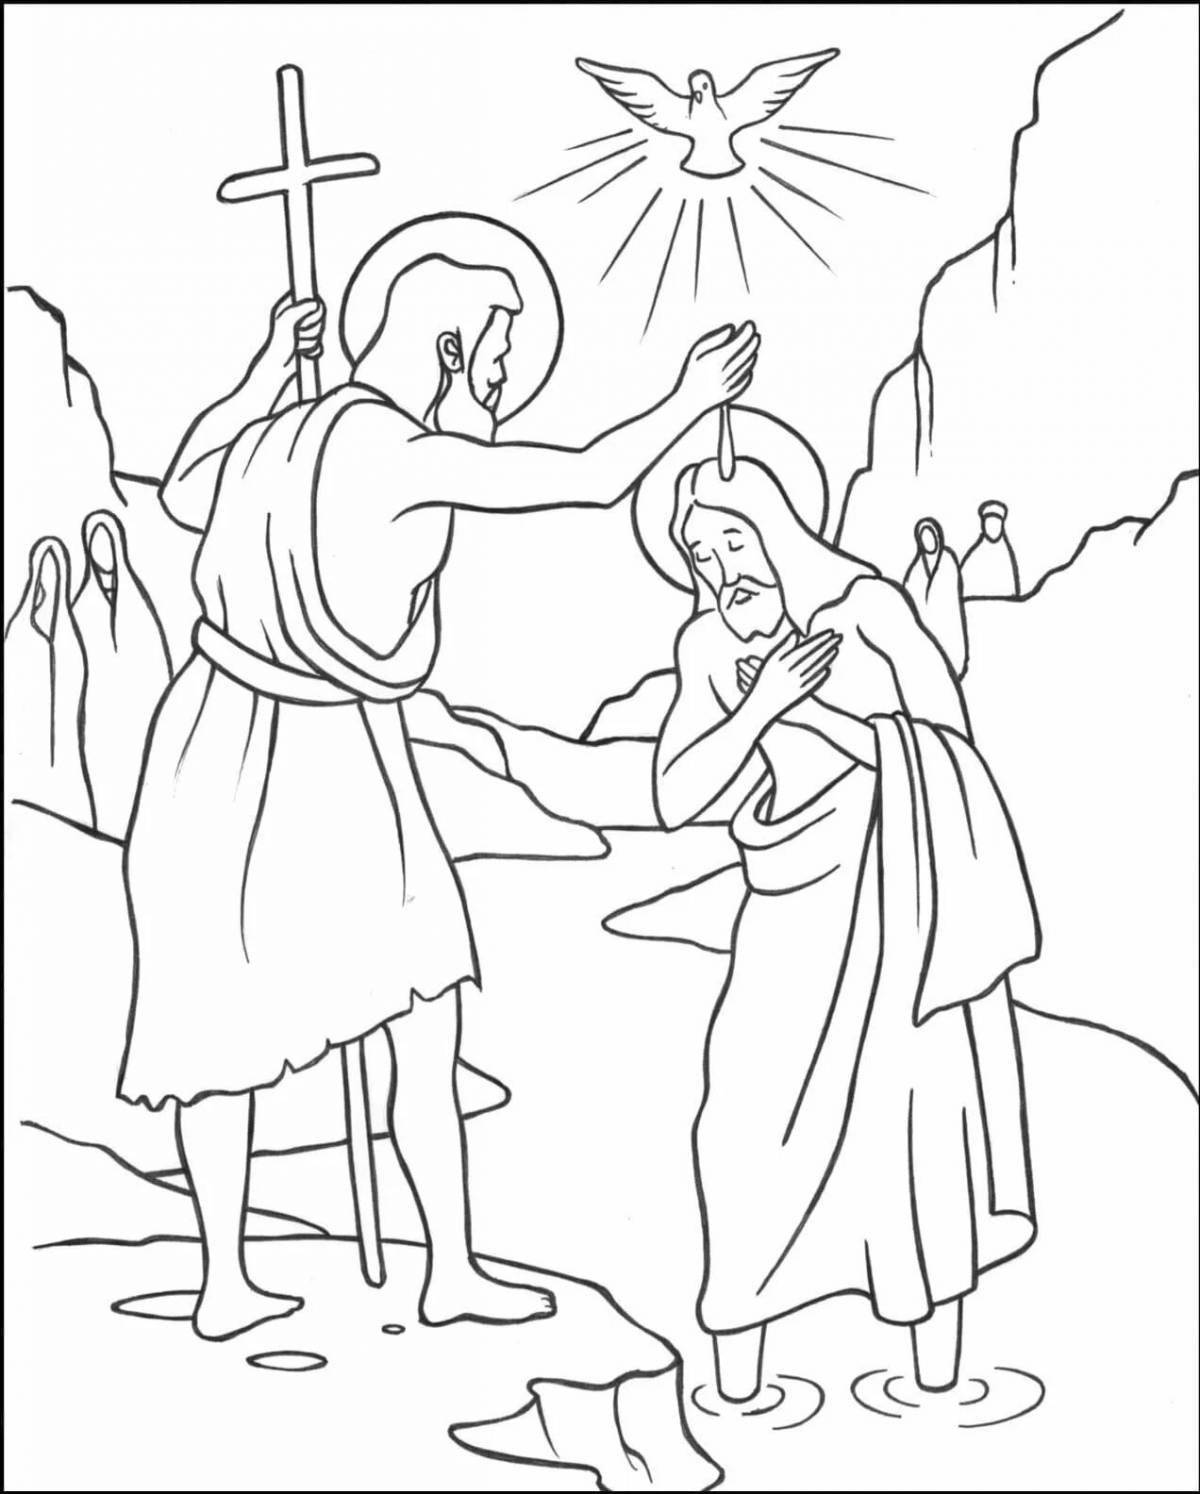 Joyful coloring of the Baptism of the Lord Orthodox